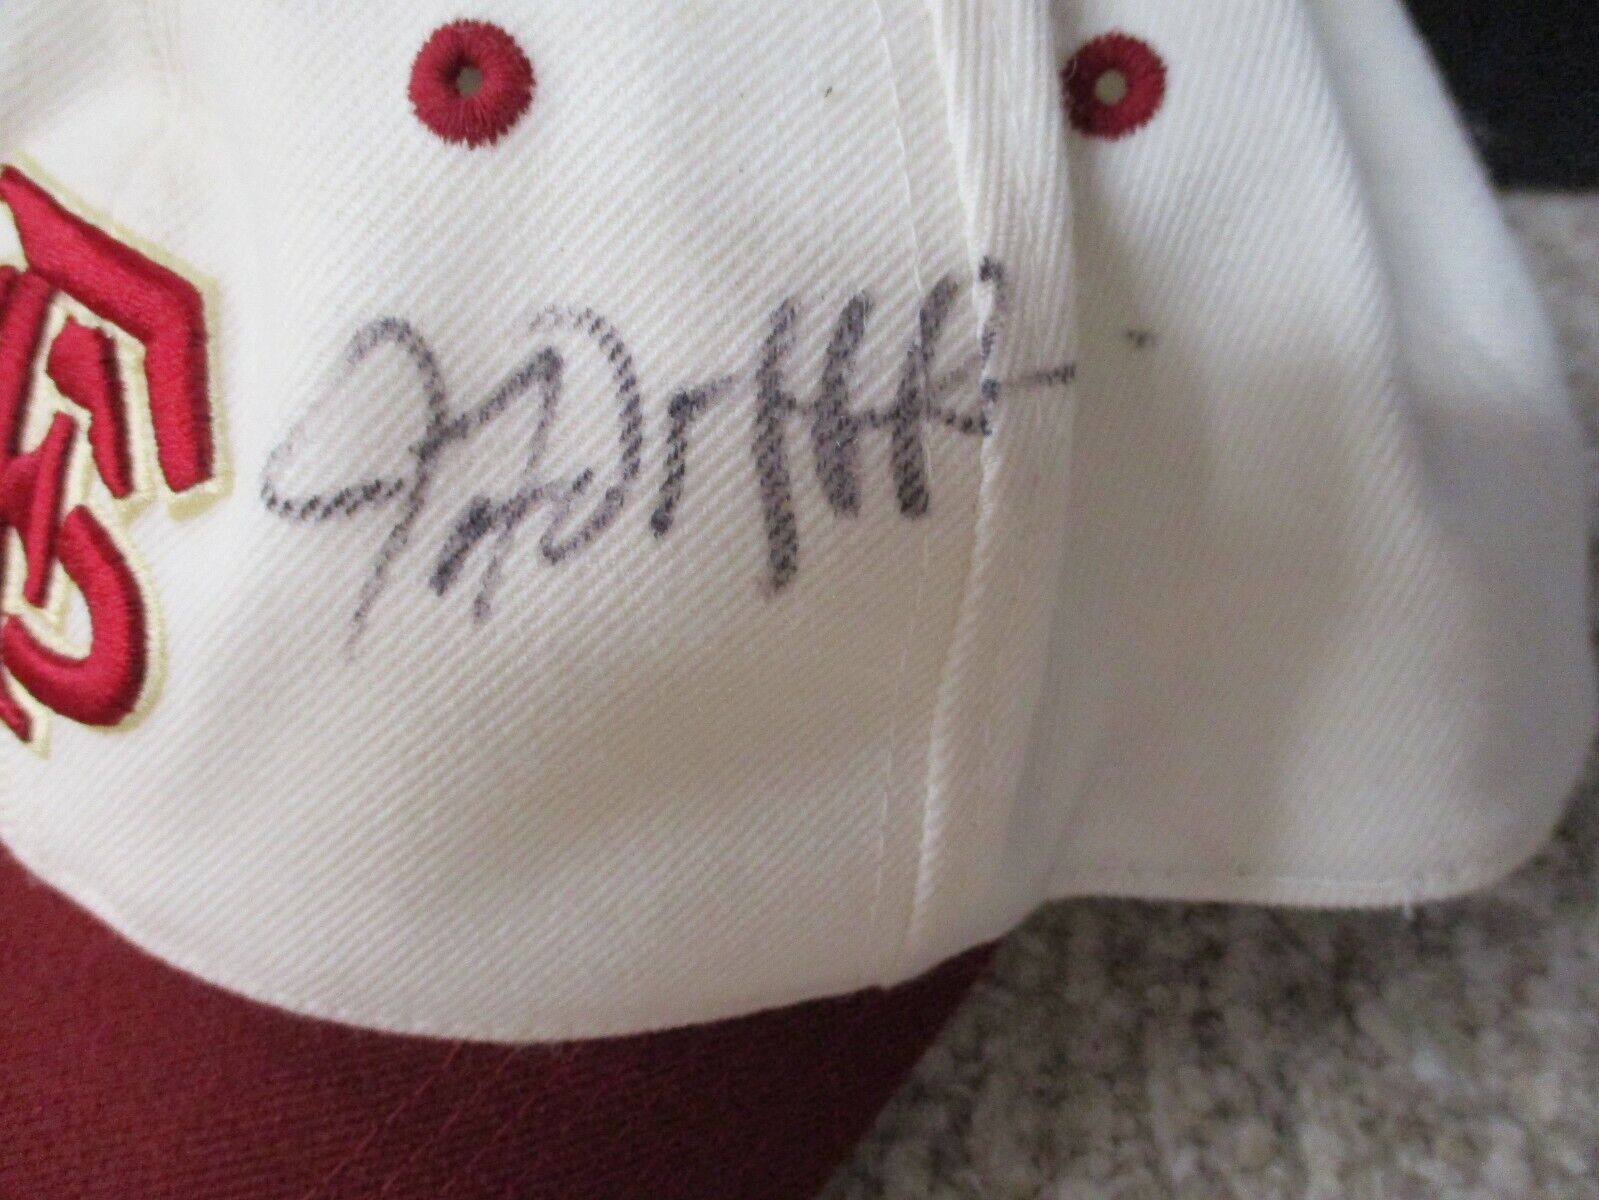 John-Ford Griffin Game Used Autographed Florida State Baseball cap PSA AJ81502